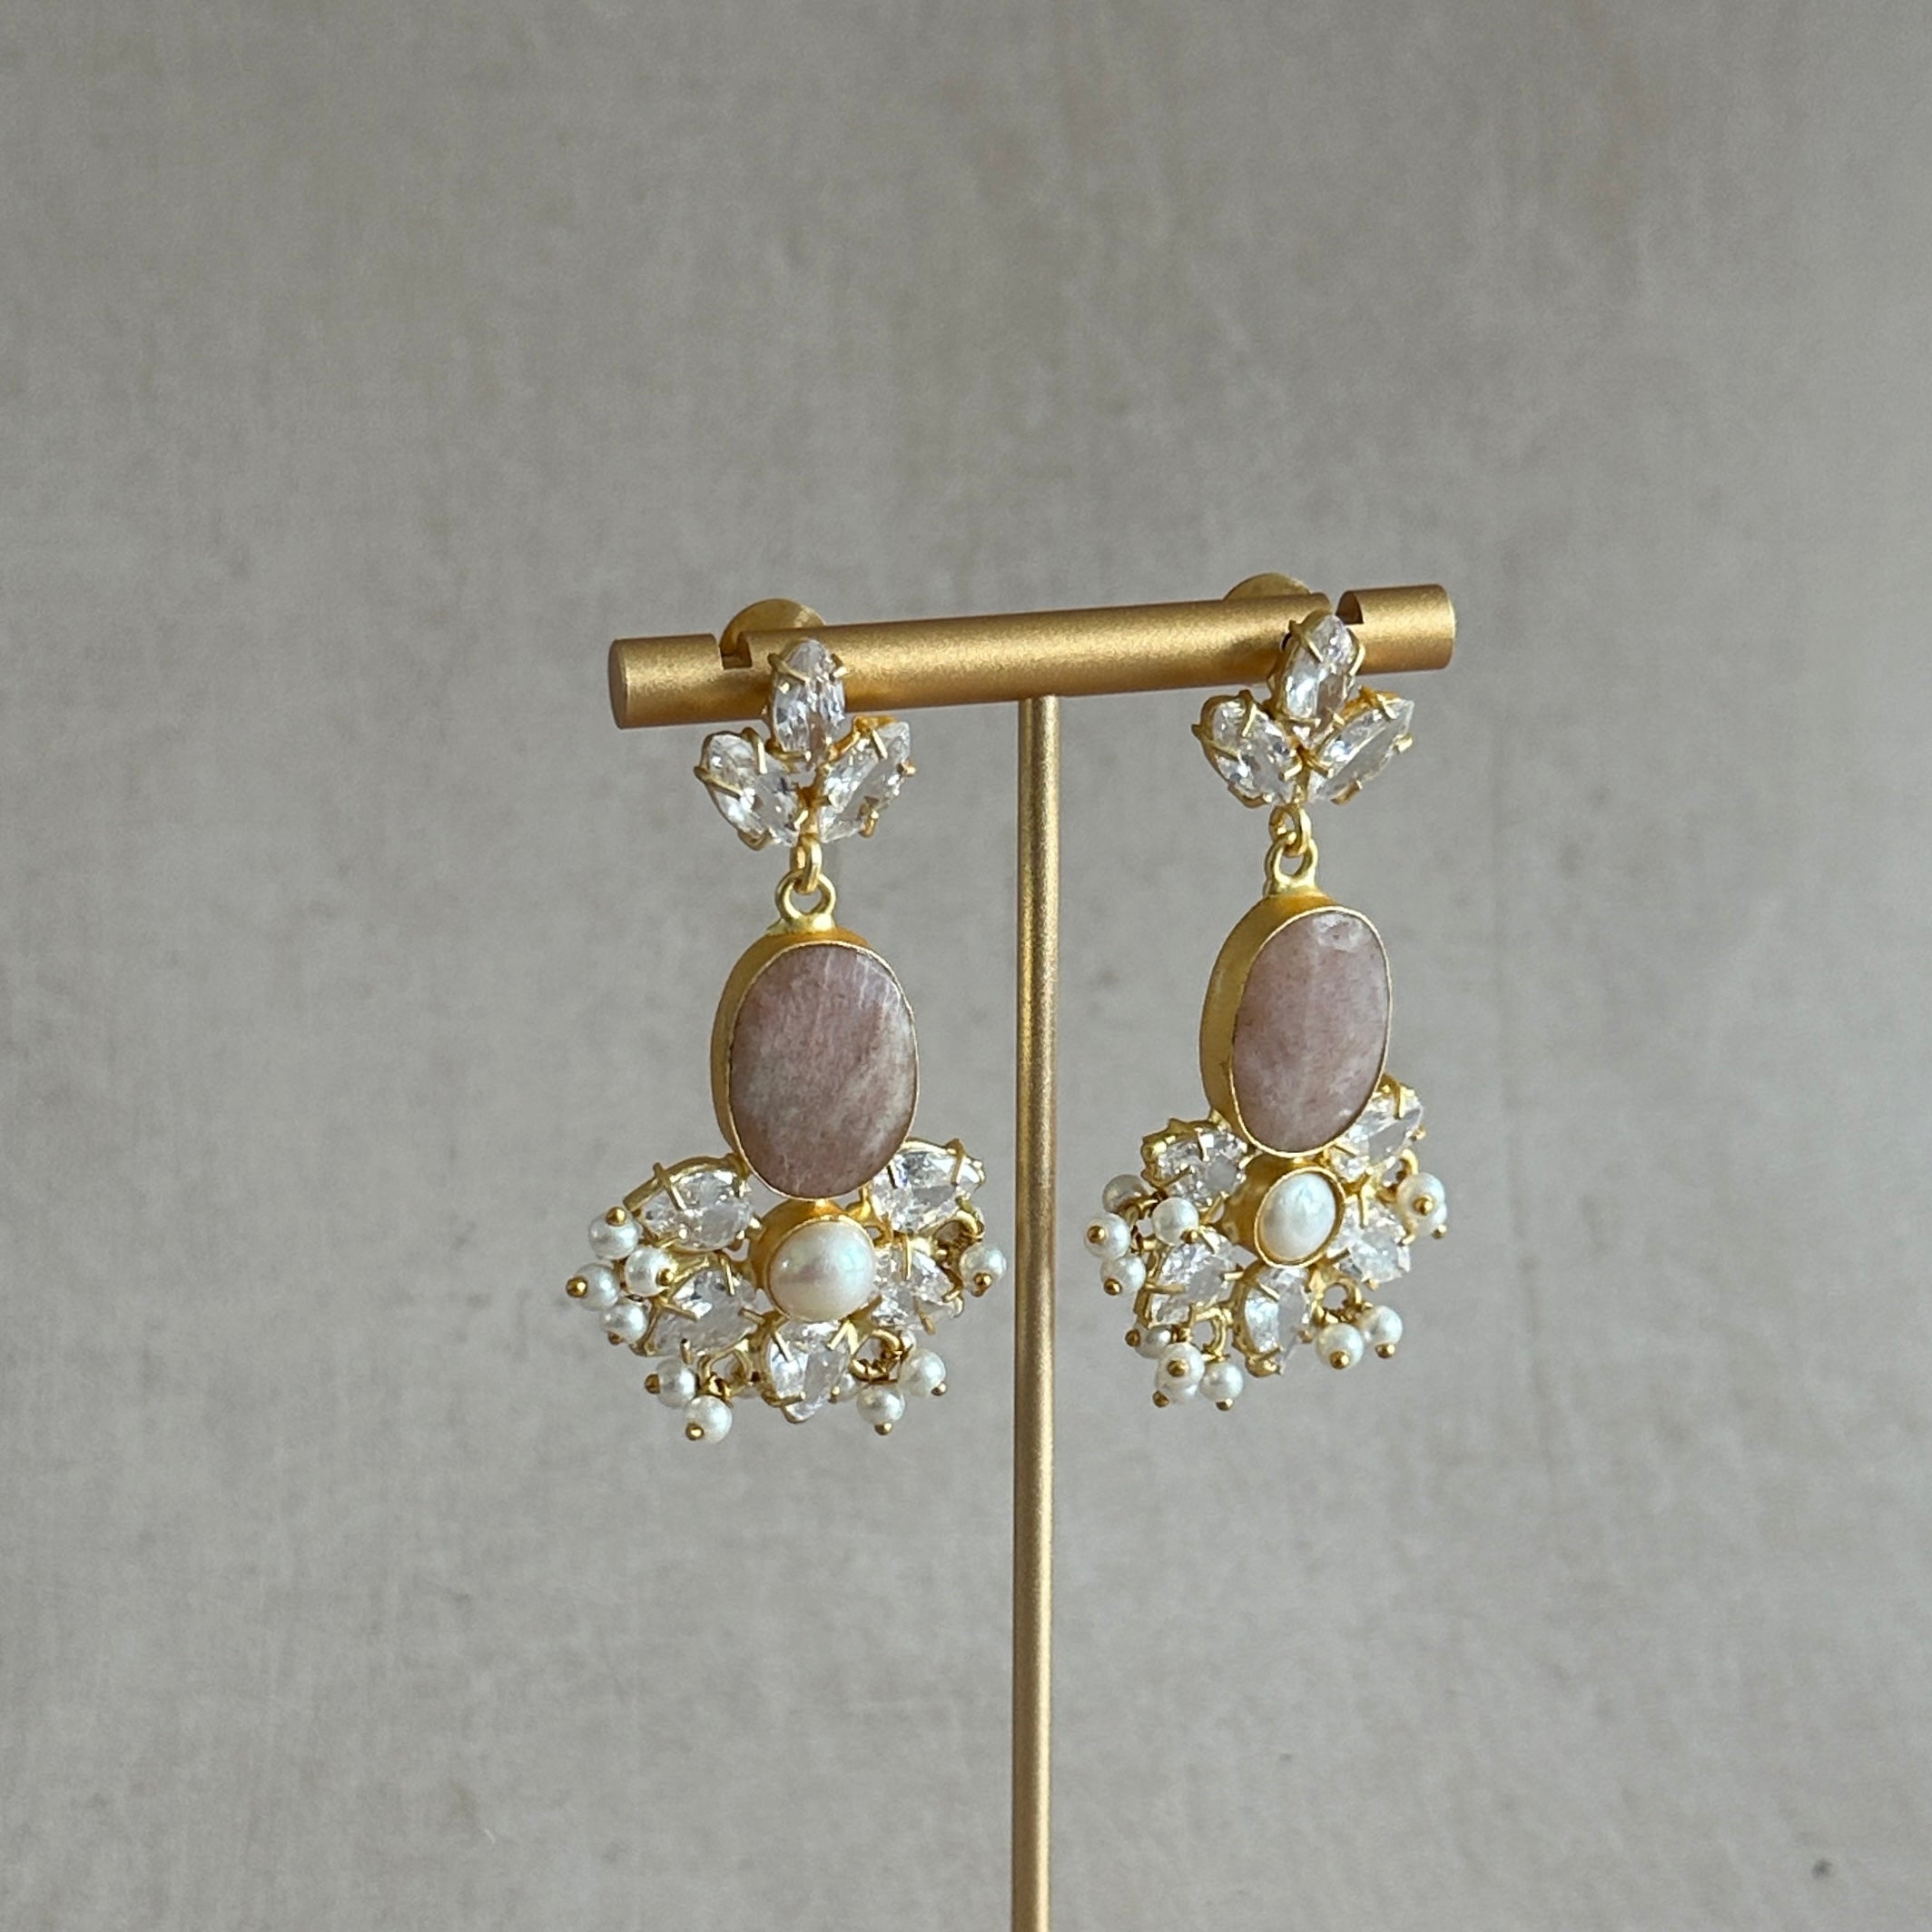 Add a touch of elegance to any outfit with the Alara Mink Crystal Drop Earrings. These exquisite earrings feature sparkling cubic zirconia and delicate pearl accents, providing a sophisticated and glamorous look for any occasion. Elevate your style with these stunning earrings.